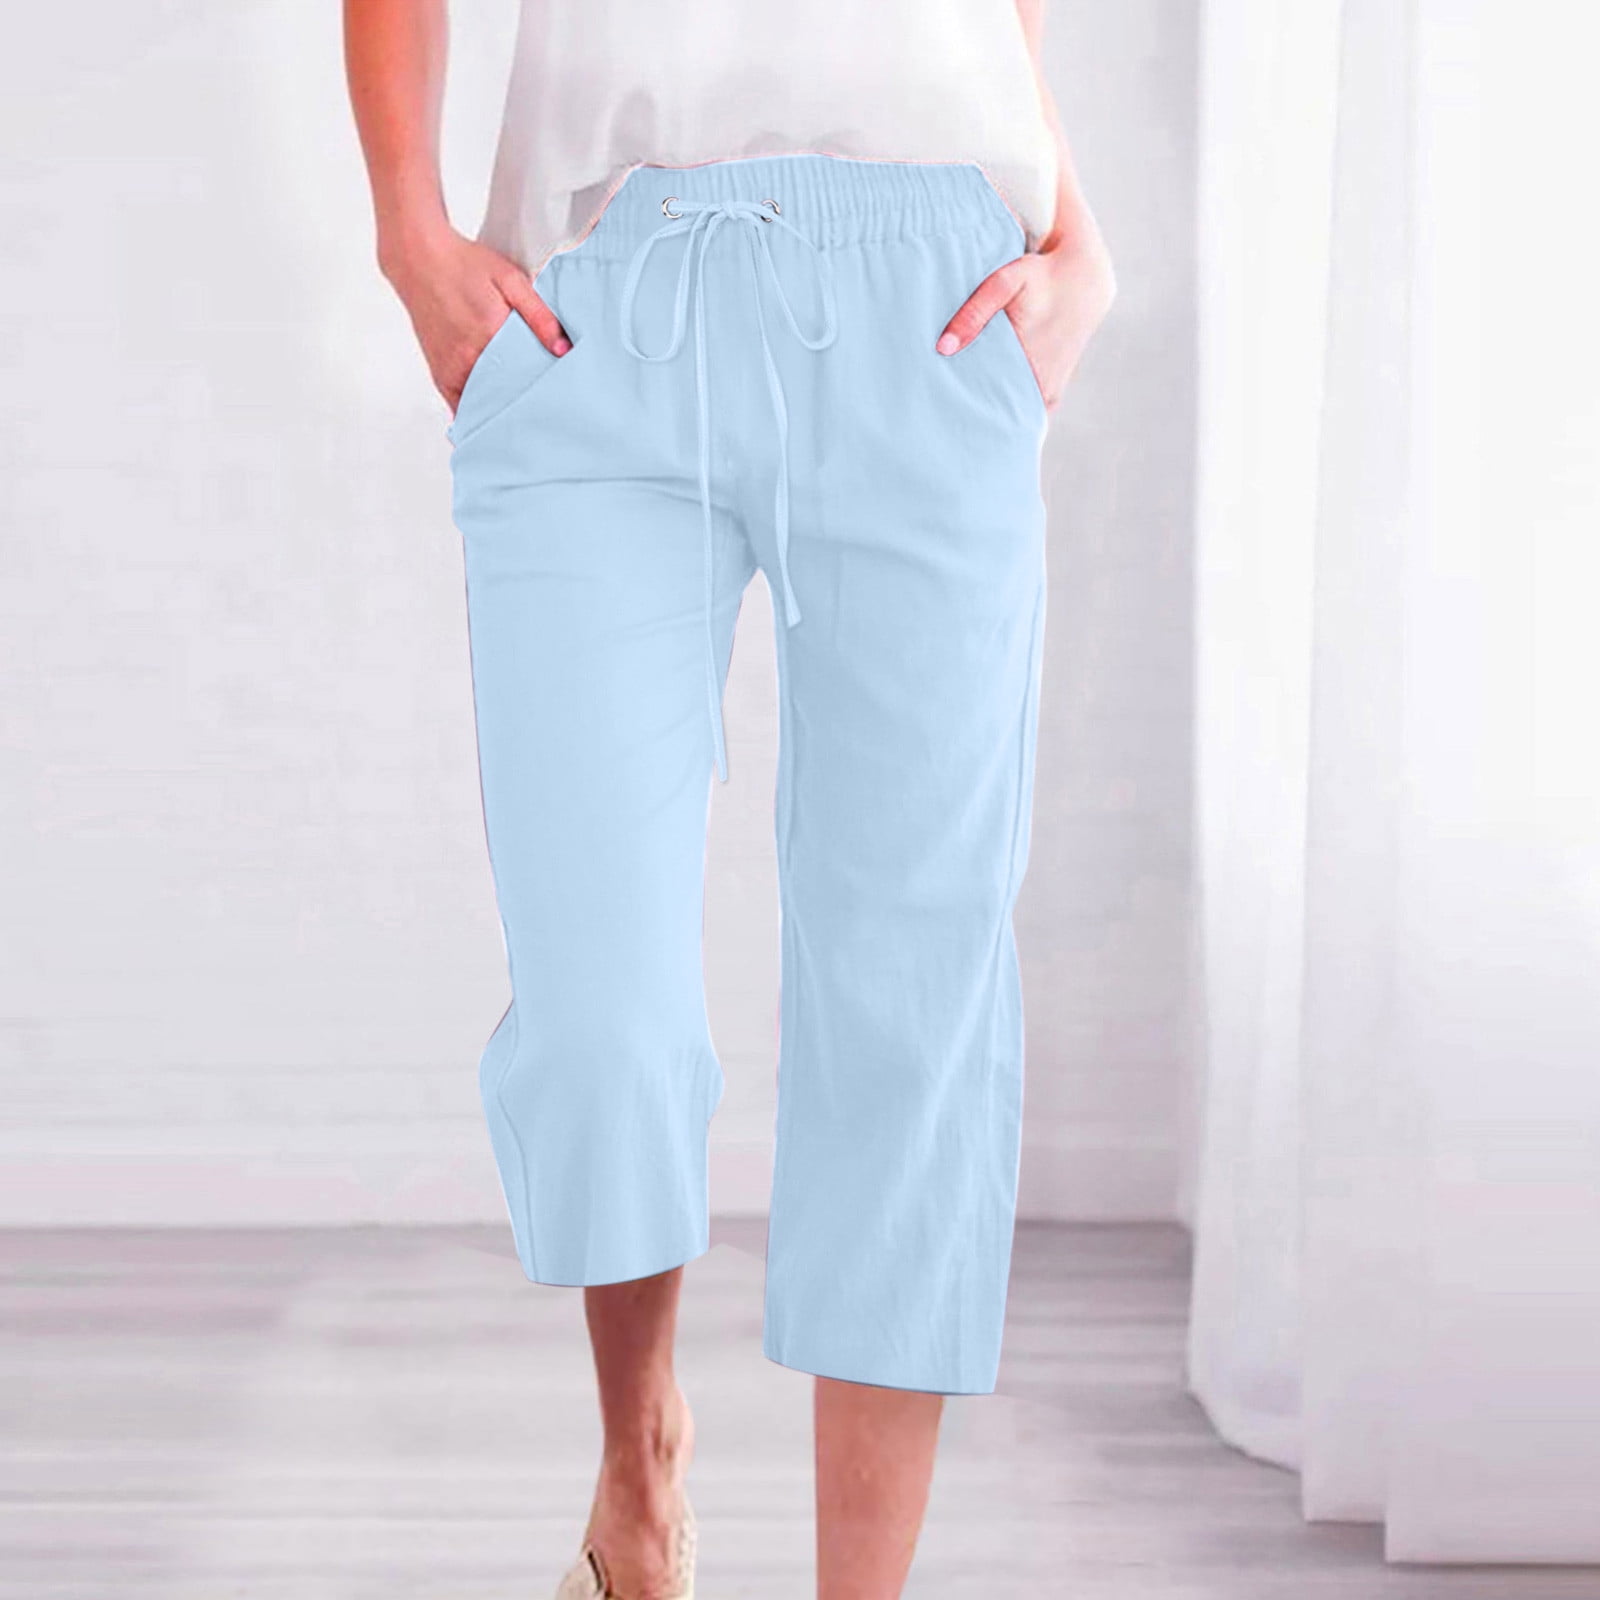 Up to 65% off! Linen Pants Women Summer Fashion Plus Size Casual Solid ...